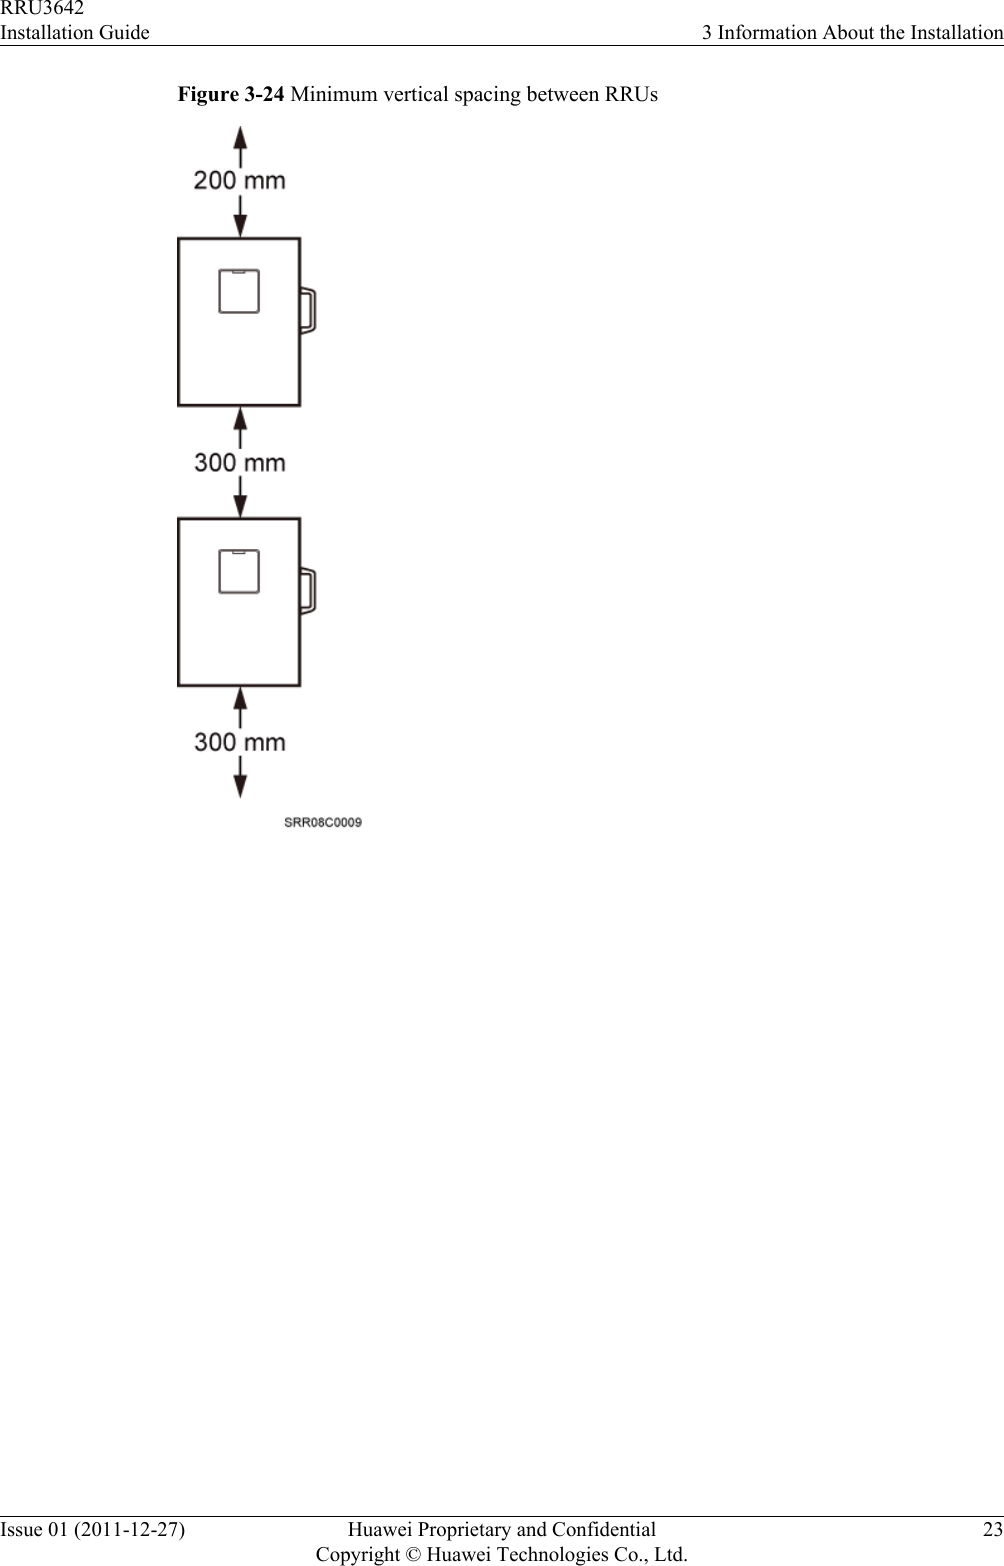 Figure 3-24 Minimum vertical spacing between RRUsRRU3642Installation Guide 3 Information About the InstallationIssue 01 (2011-12-27) Huawei Proprietary and ConfidentialCopyright © Huawei Technologies Co., Ltd.23